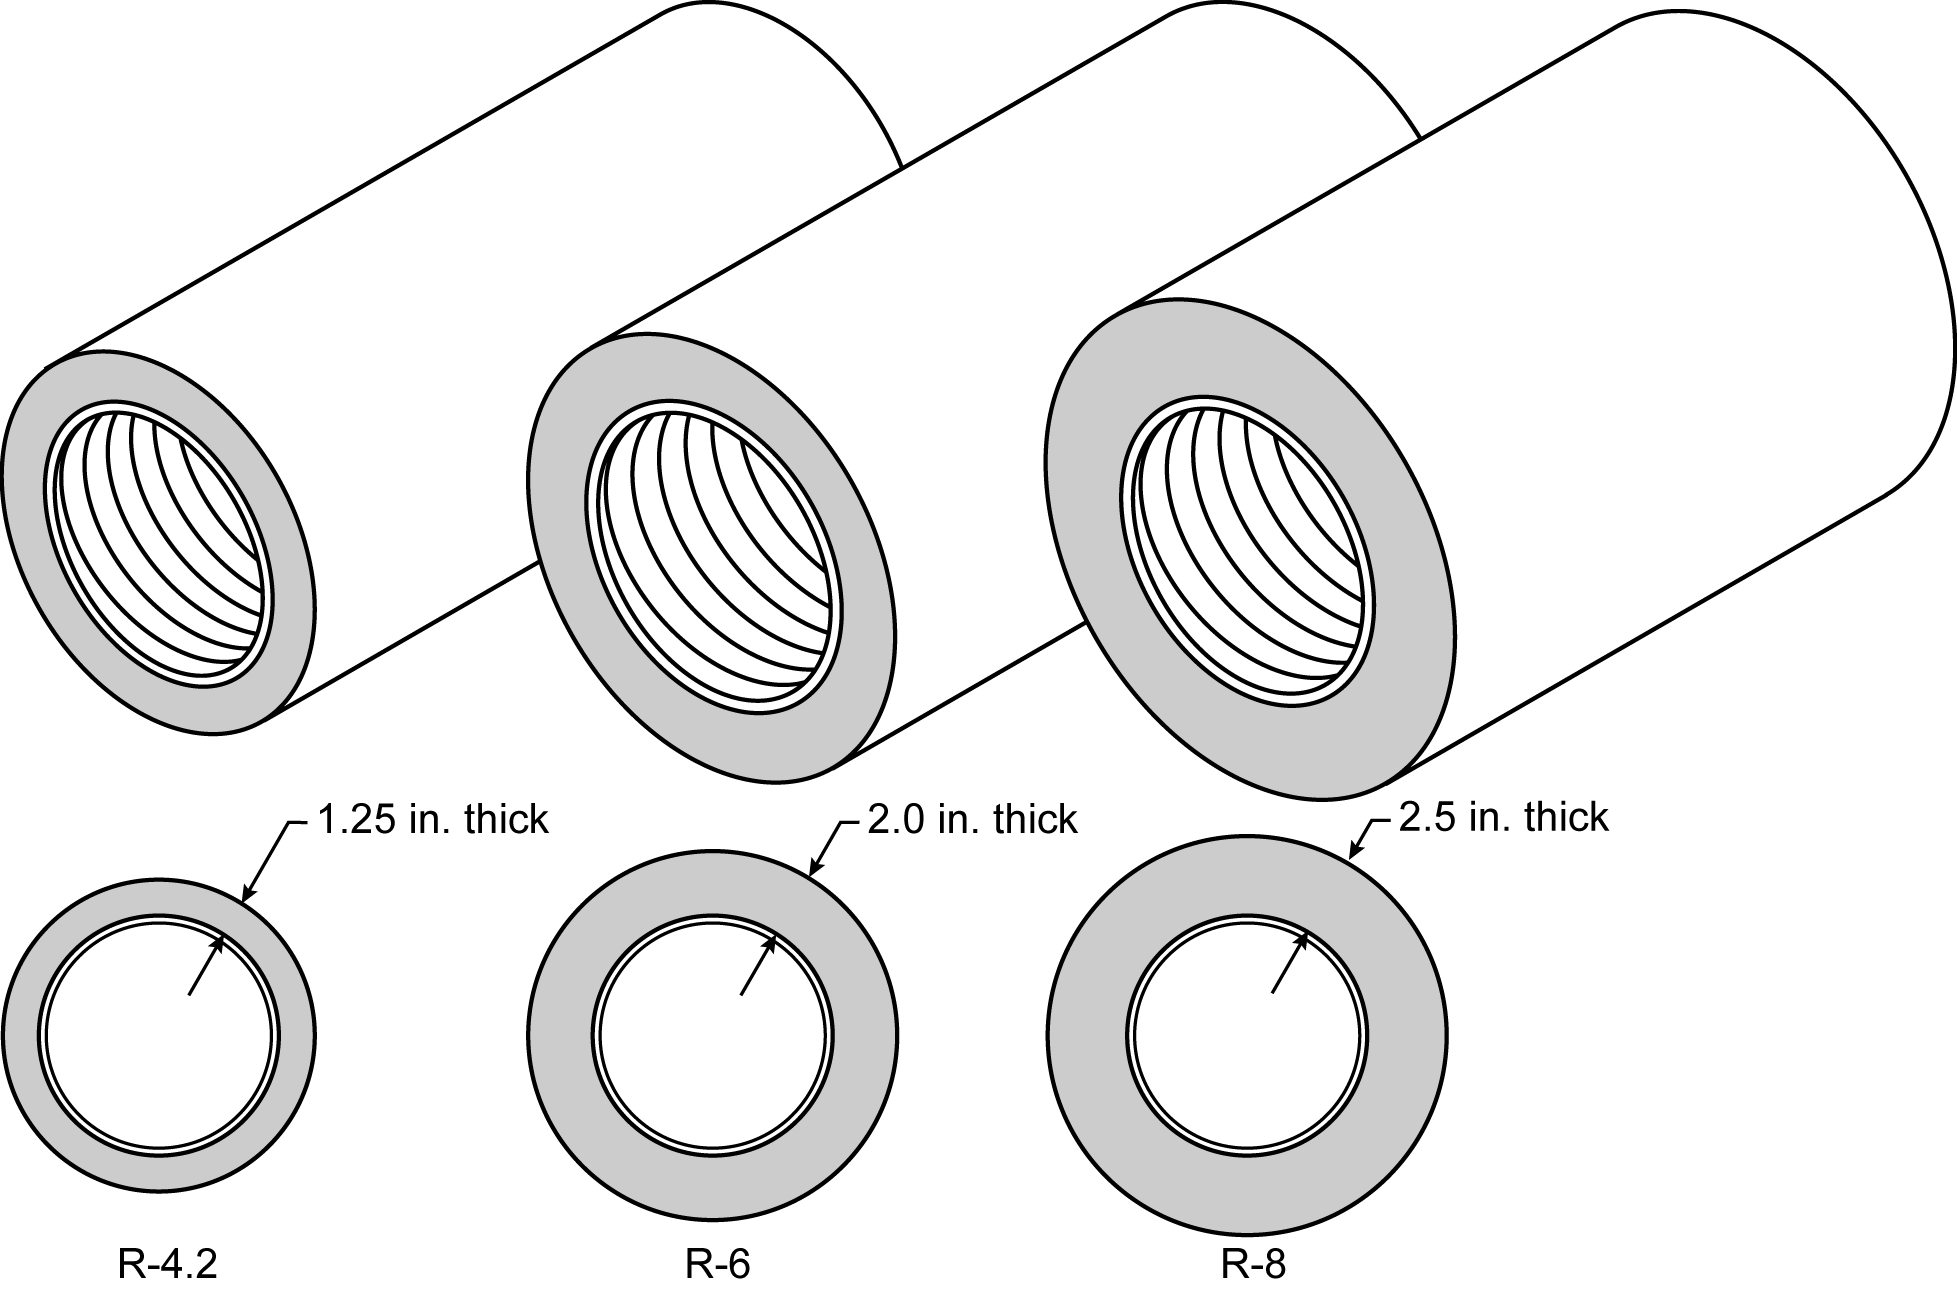 Image showing a R-4.2, R-6, and R-8 ducts